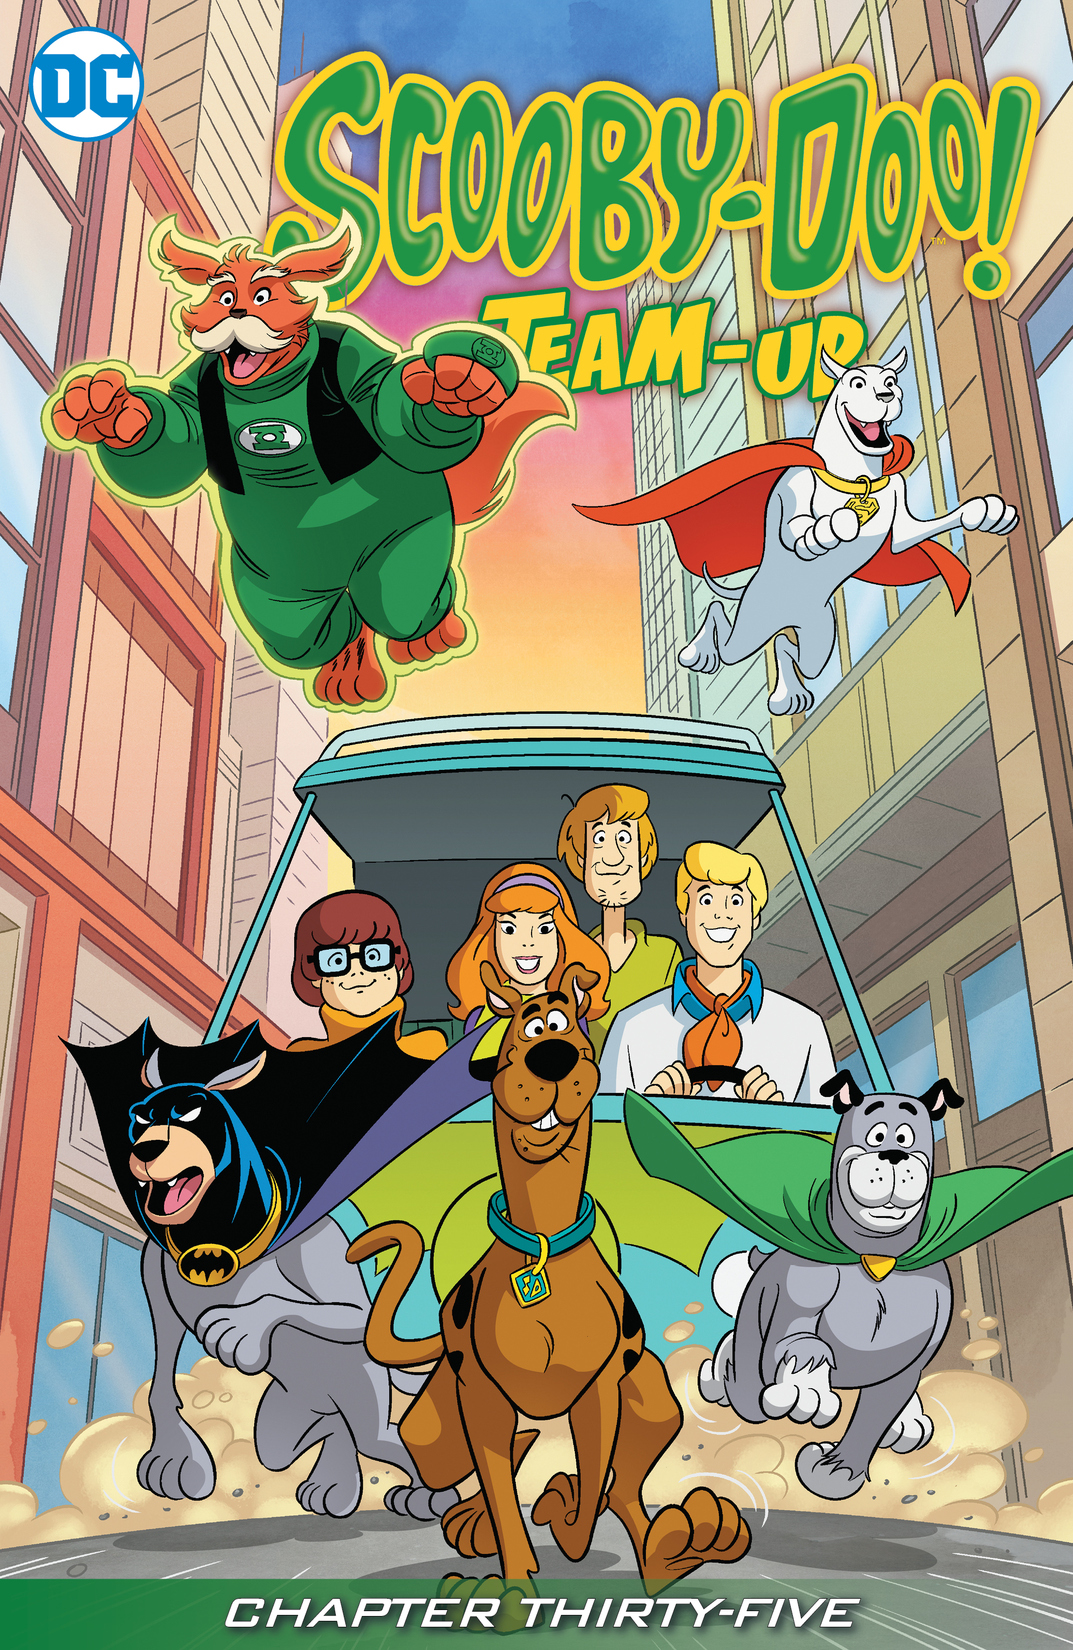 Scooby-Doo Team-Up #35 preview images